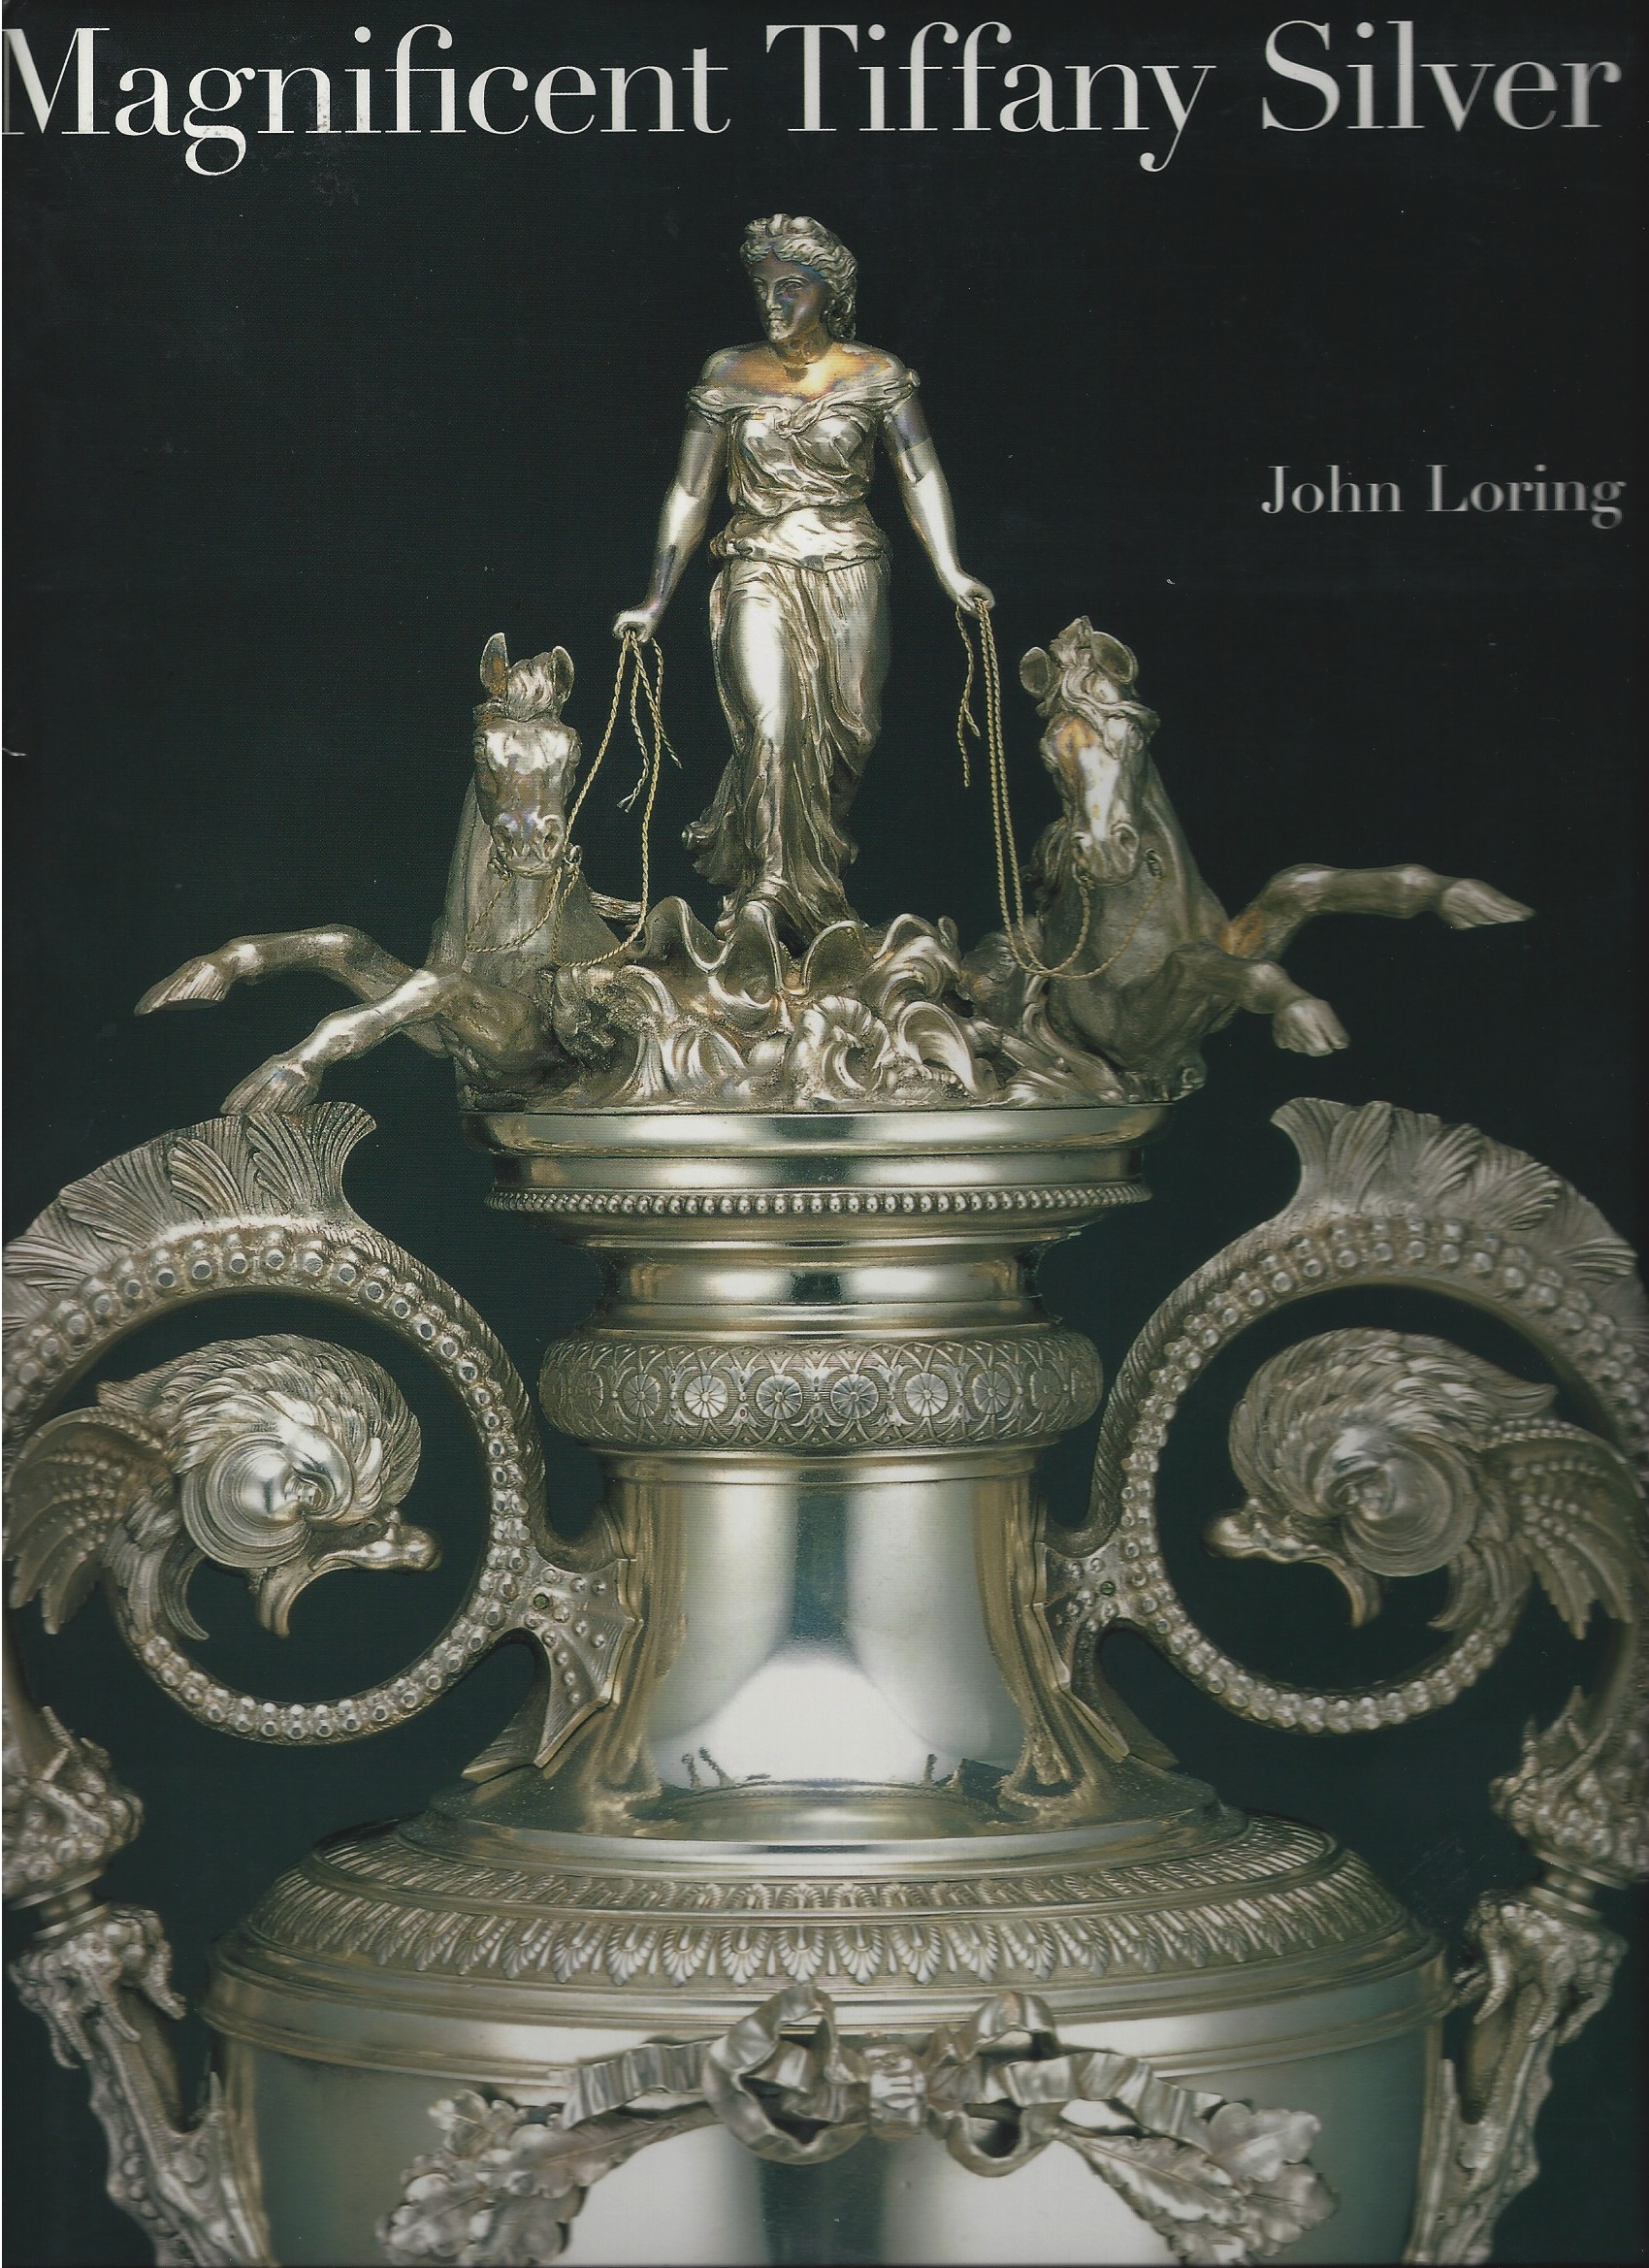 Magnificent Tiffany Silver by John Loring - Front Cover